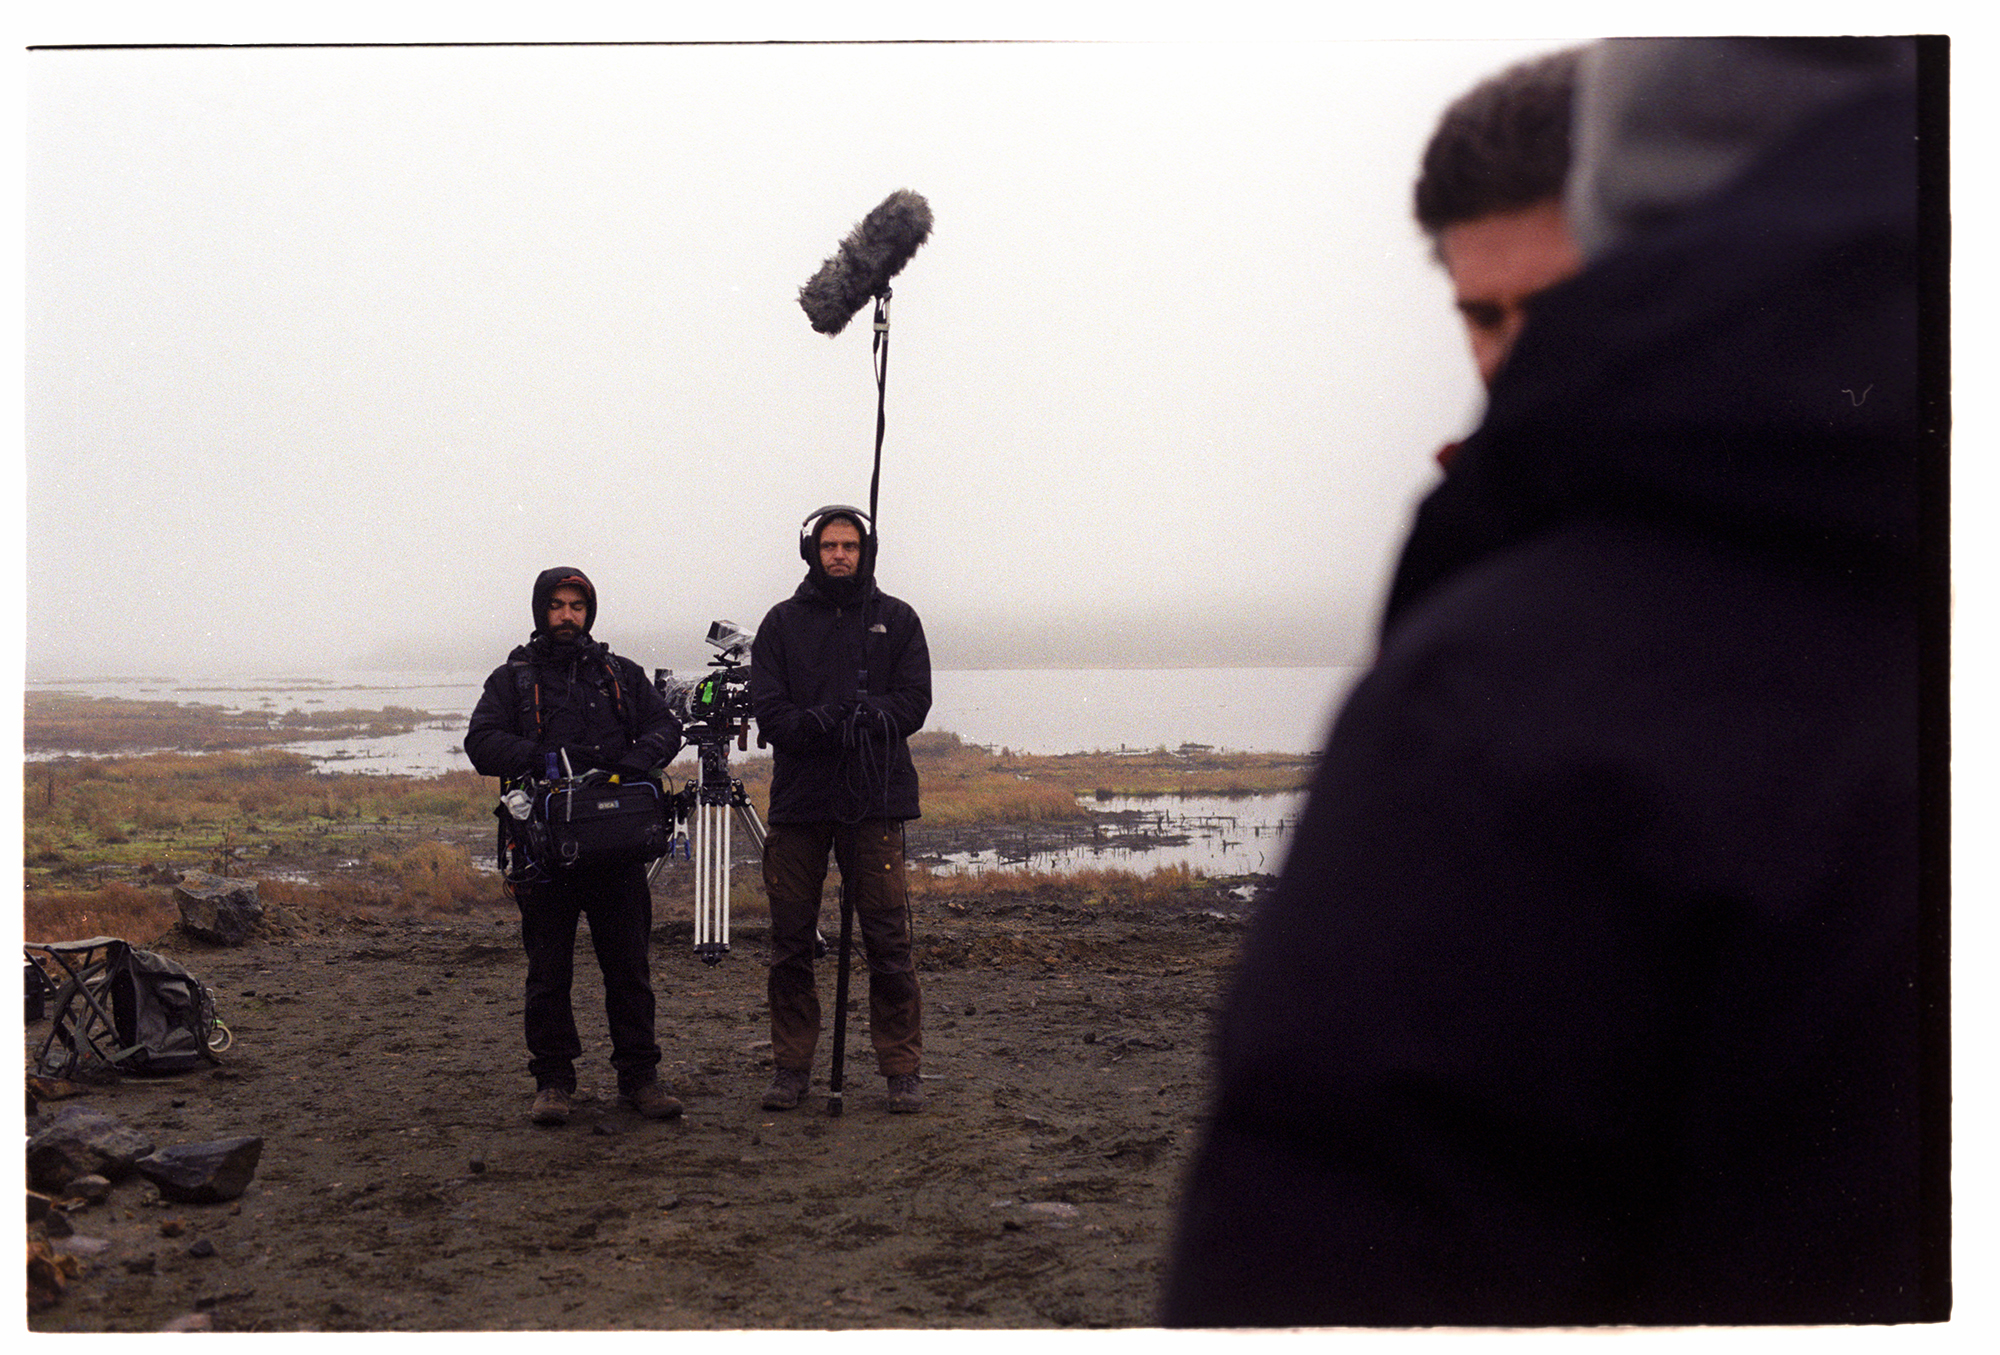  Shooting  Viimased  (The Last Ones) in Lapland (Finland). Photo by Teddy Puusepp 